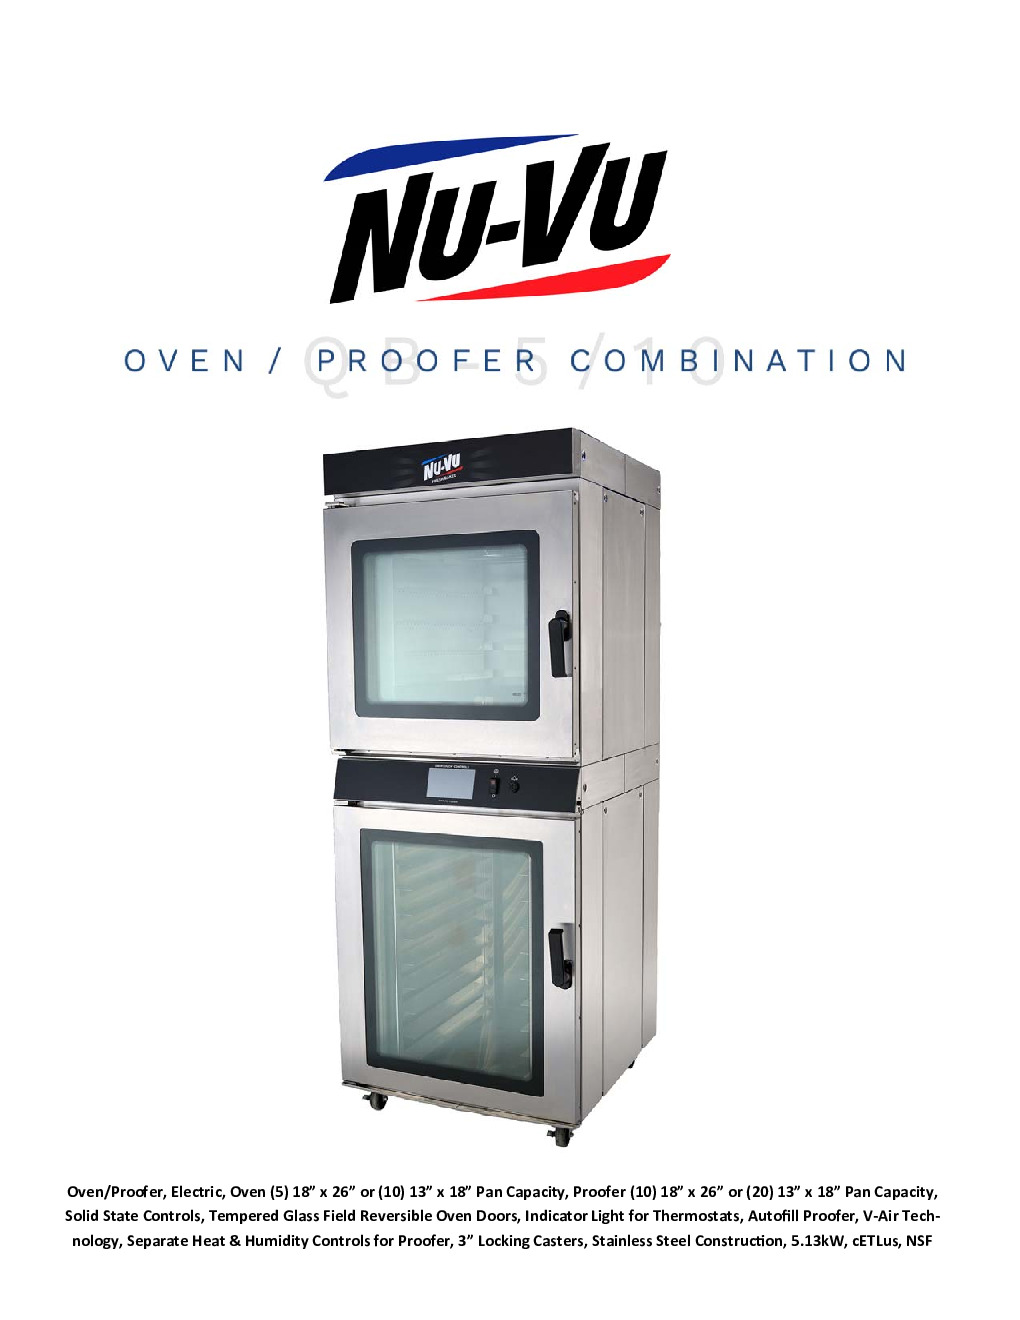 NU-VU QB-5/10 Electric Convection Oven / Proofer with Solid State Controls